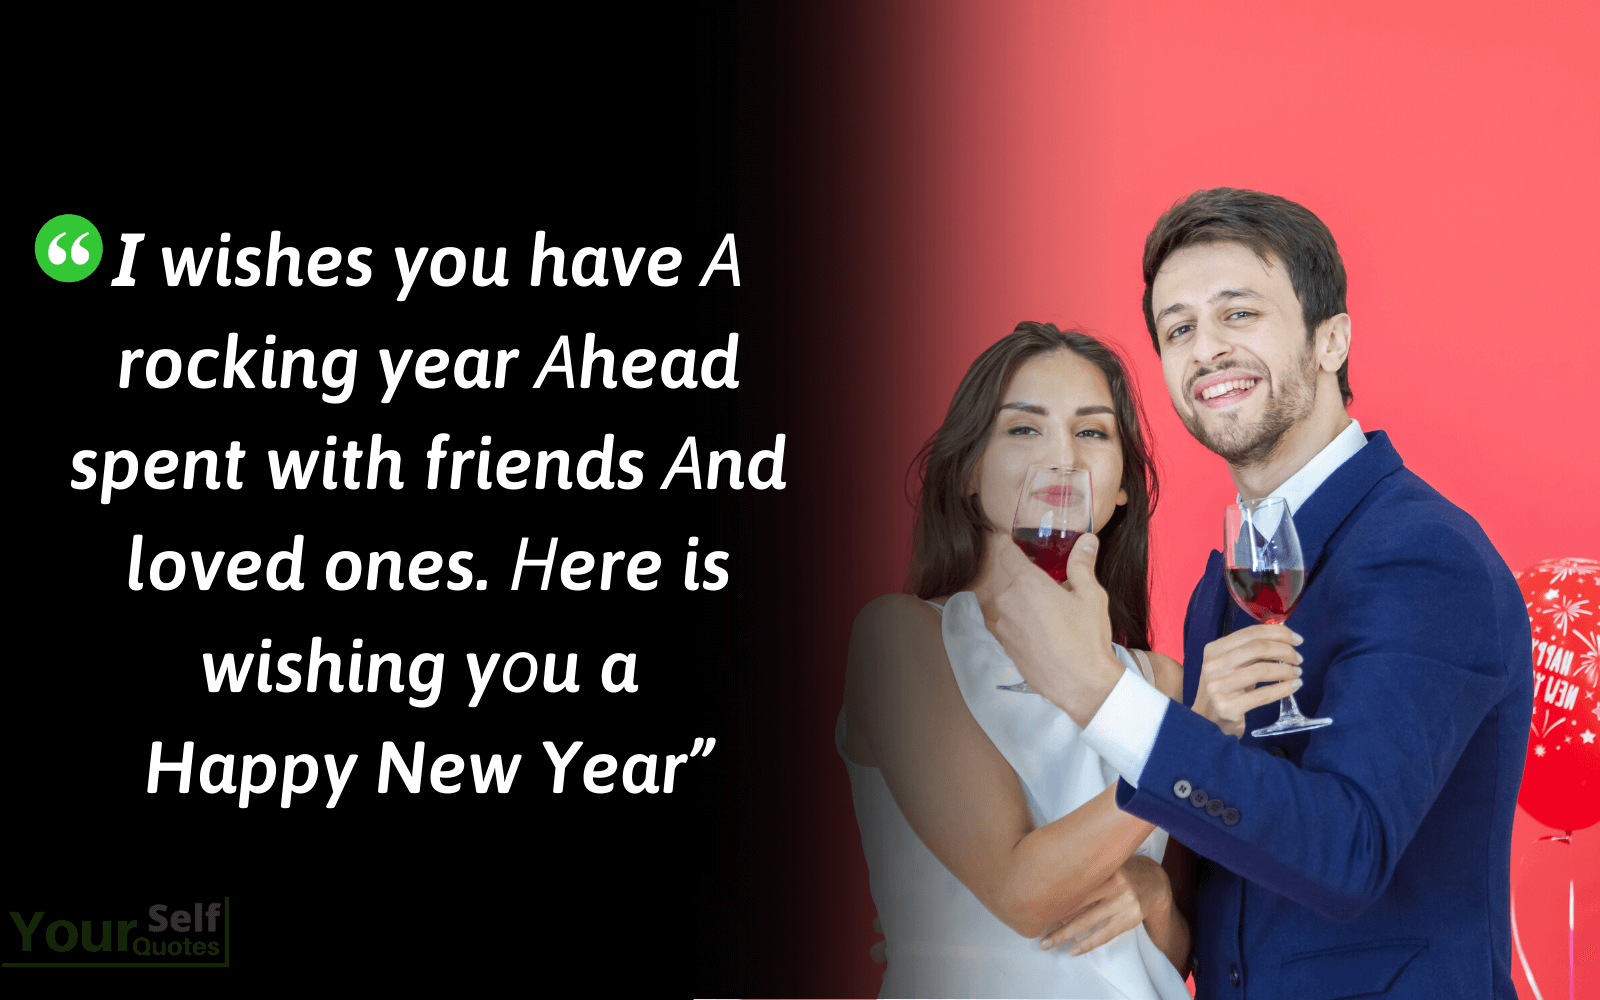 Happy New Year Greeting Wallpaper